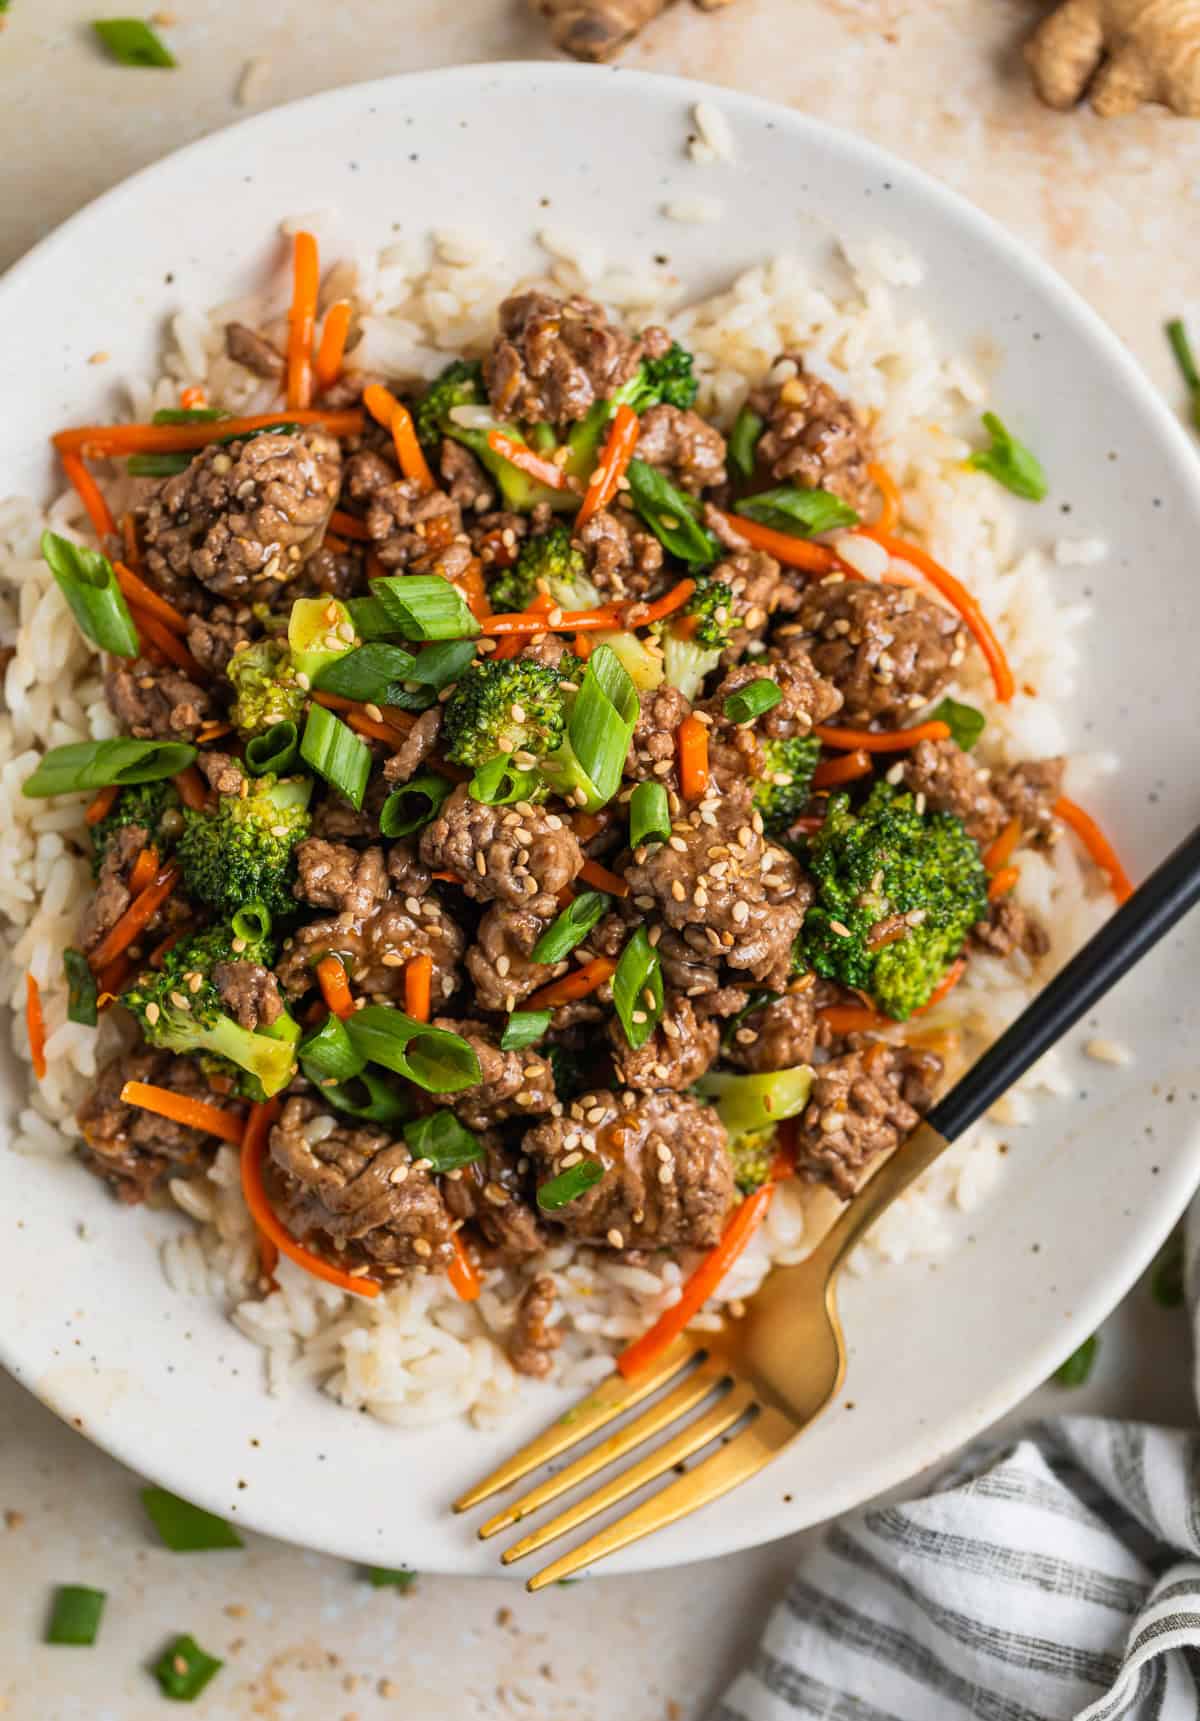 Plate with ground beef teriyaki with broccoli and carrots served over rice and topped with sesame seeds.